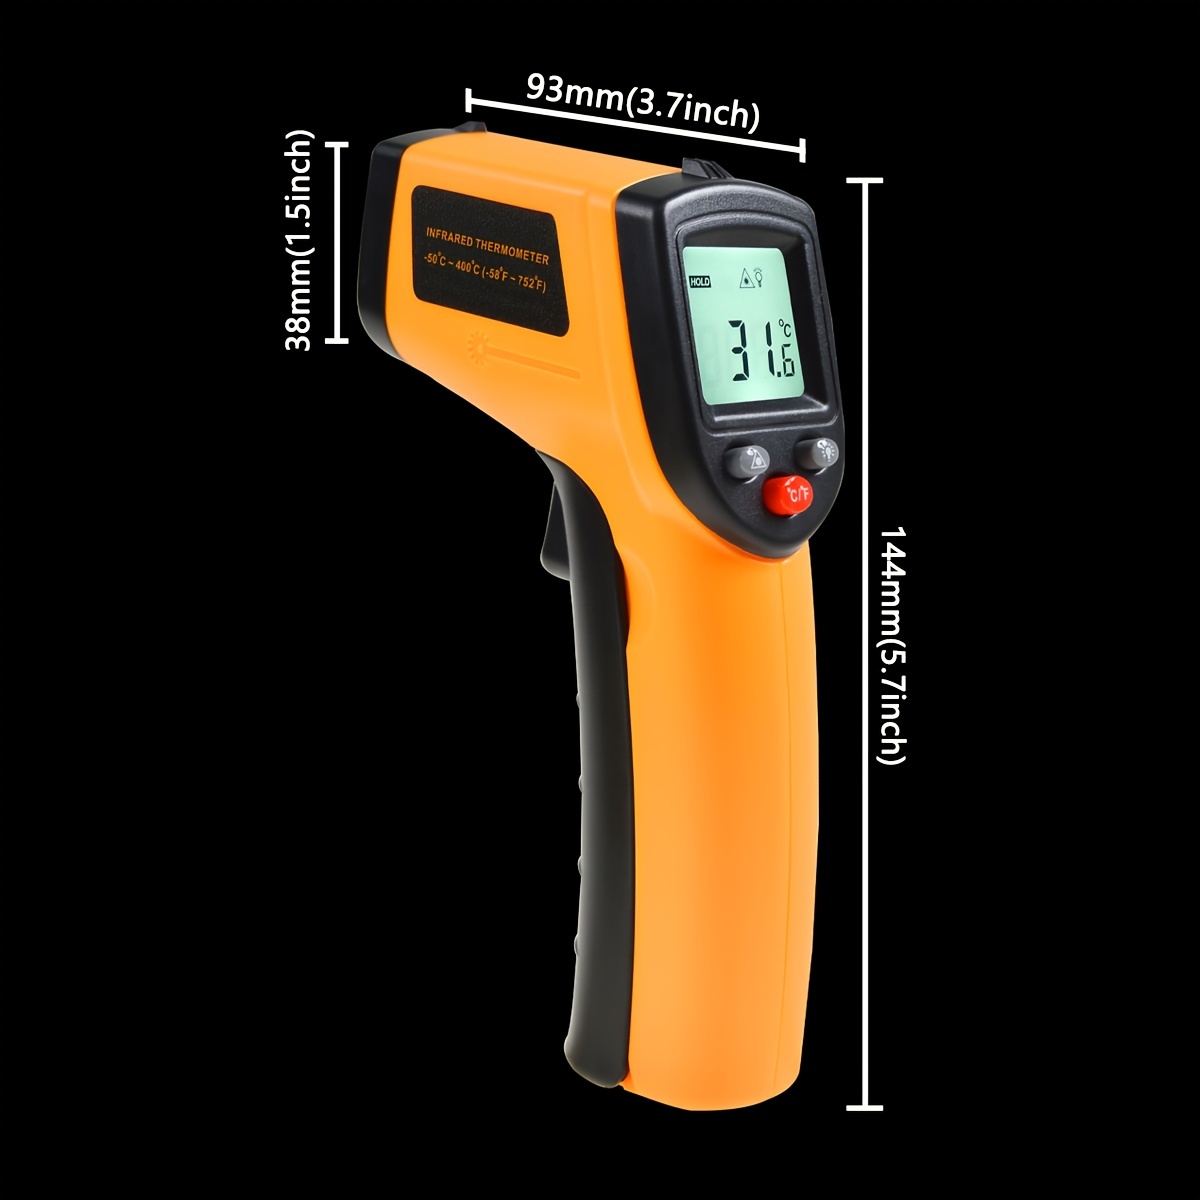 Digital Infrared Thermometer 380, No Touch Digital Laser Temperature Gun  for Cooking/BBQ/Meat, For gifts